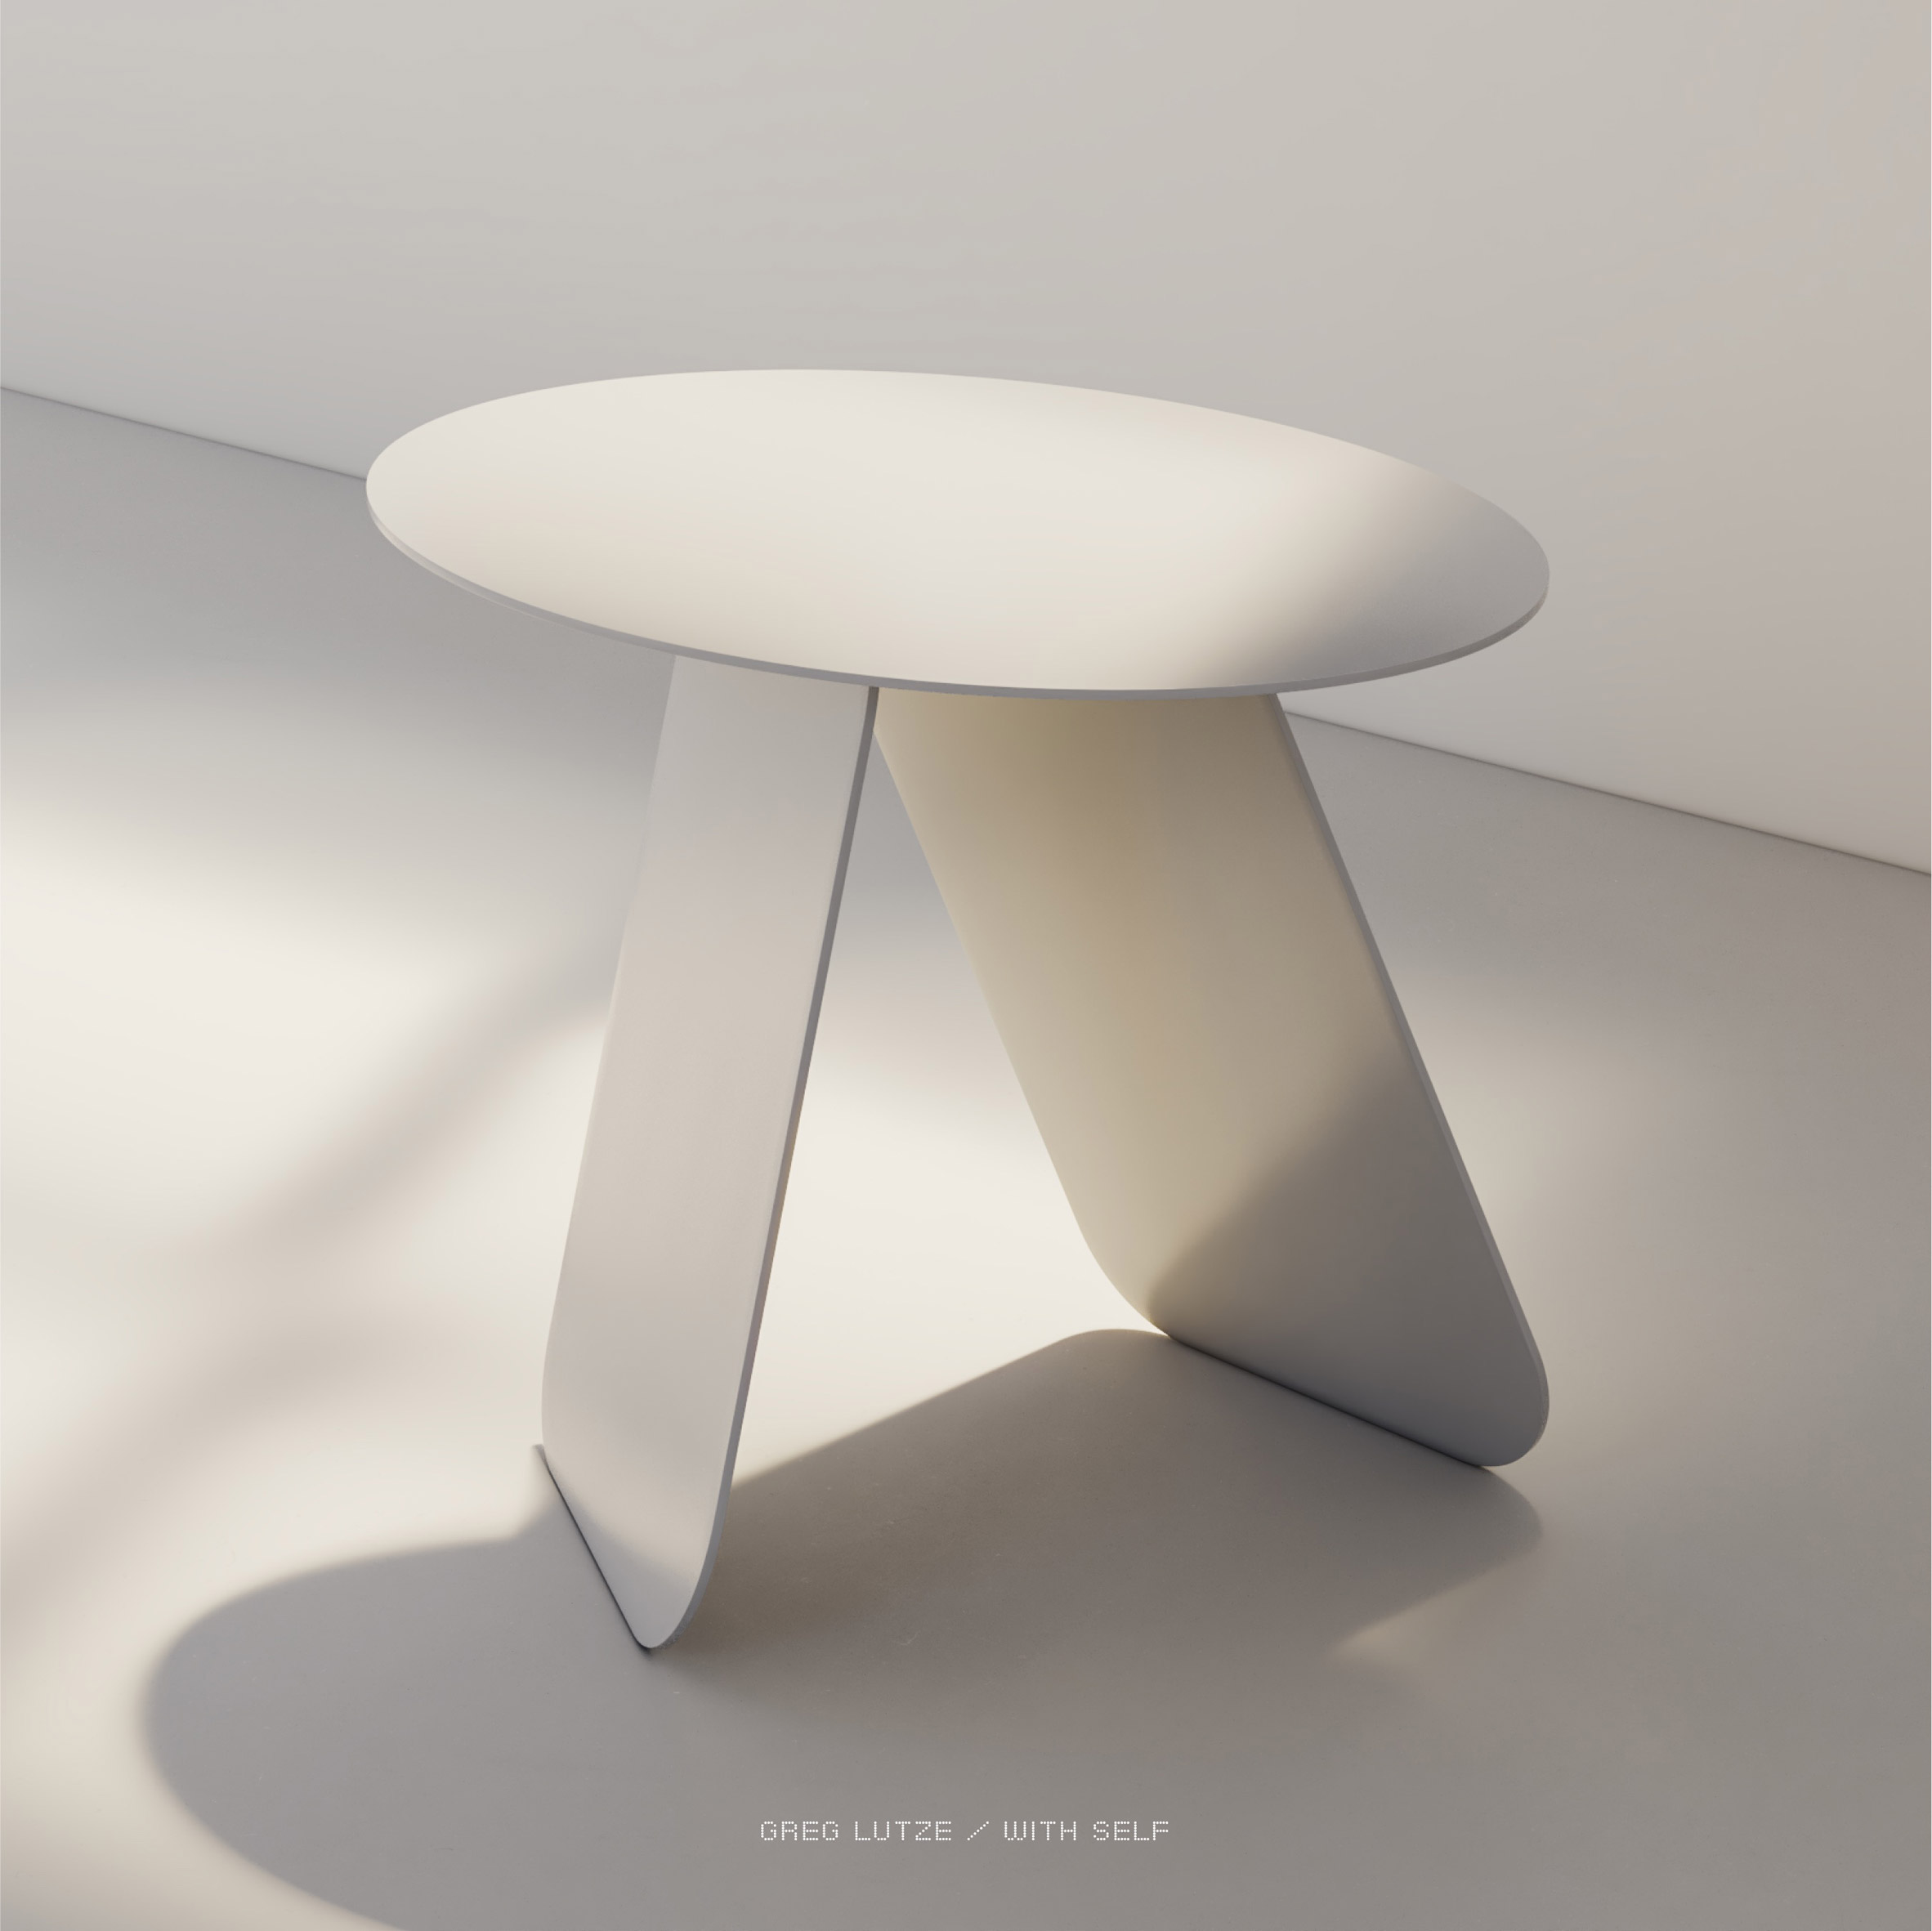 White steel table by Greg Lutze with Self